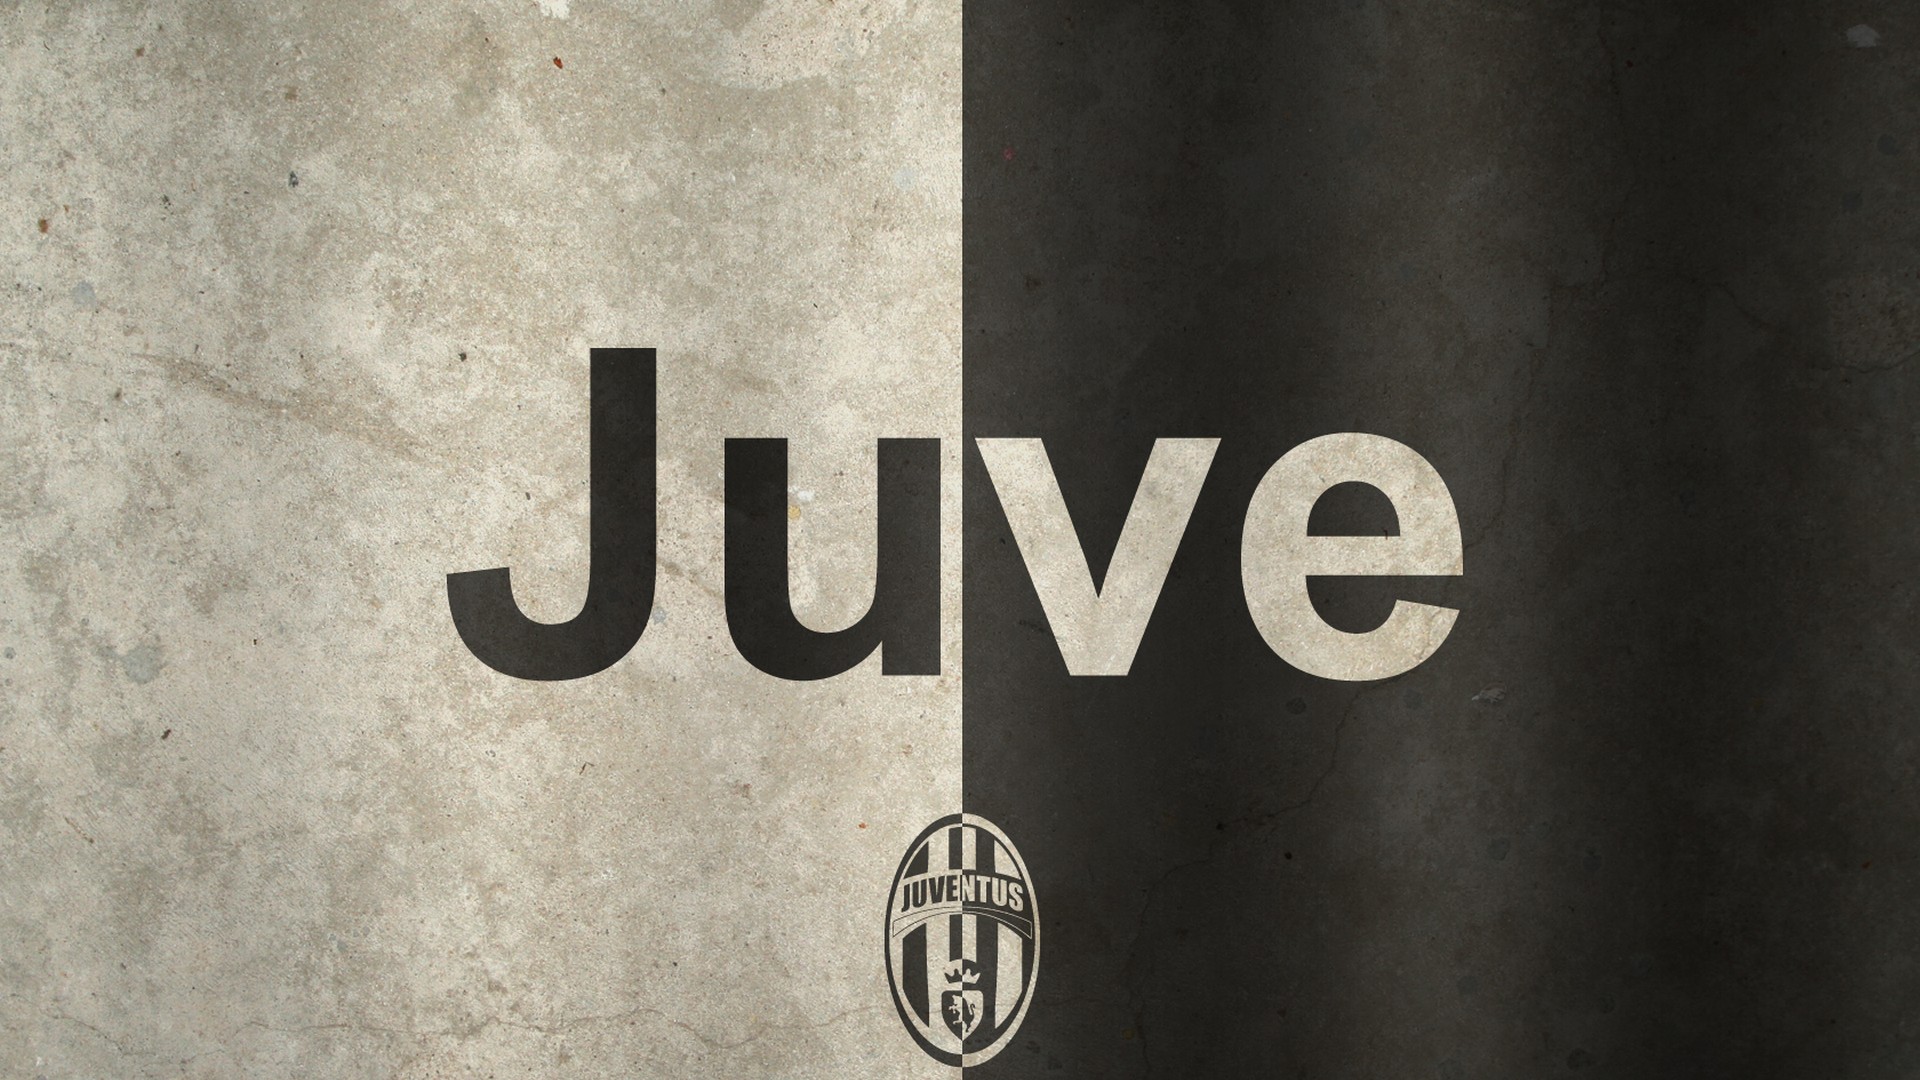 Juventus Logo Wallpaper with resolution 1920x1080 pixel. You can make this wallpaper for your Mac or Windows Desktop Background, iPhone, Android or Tablet and another Smartphone device